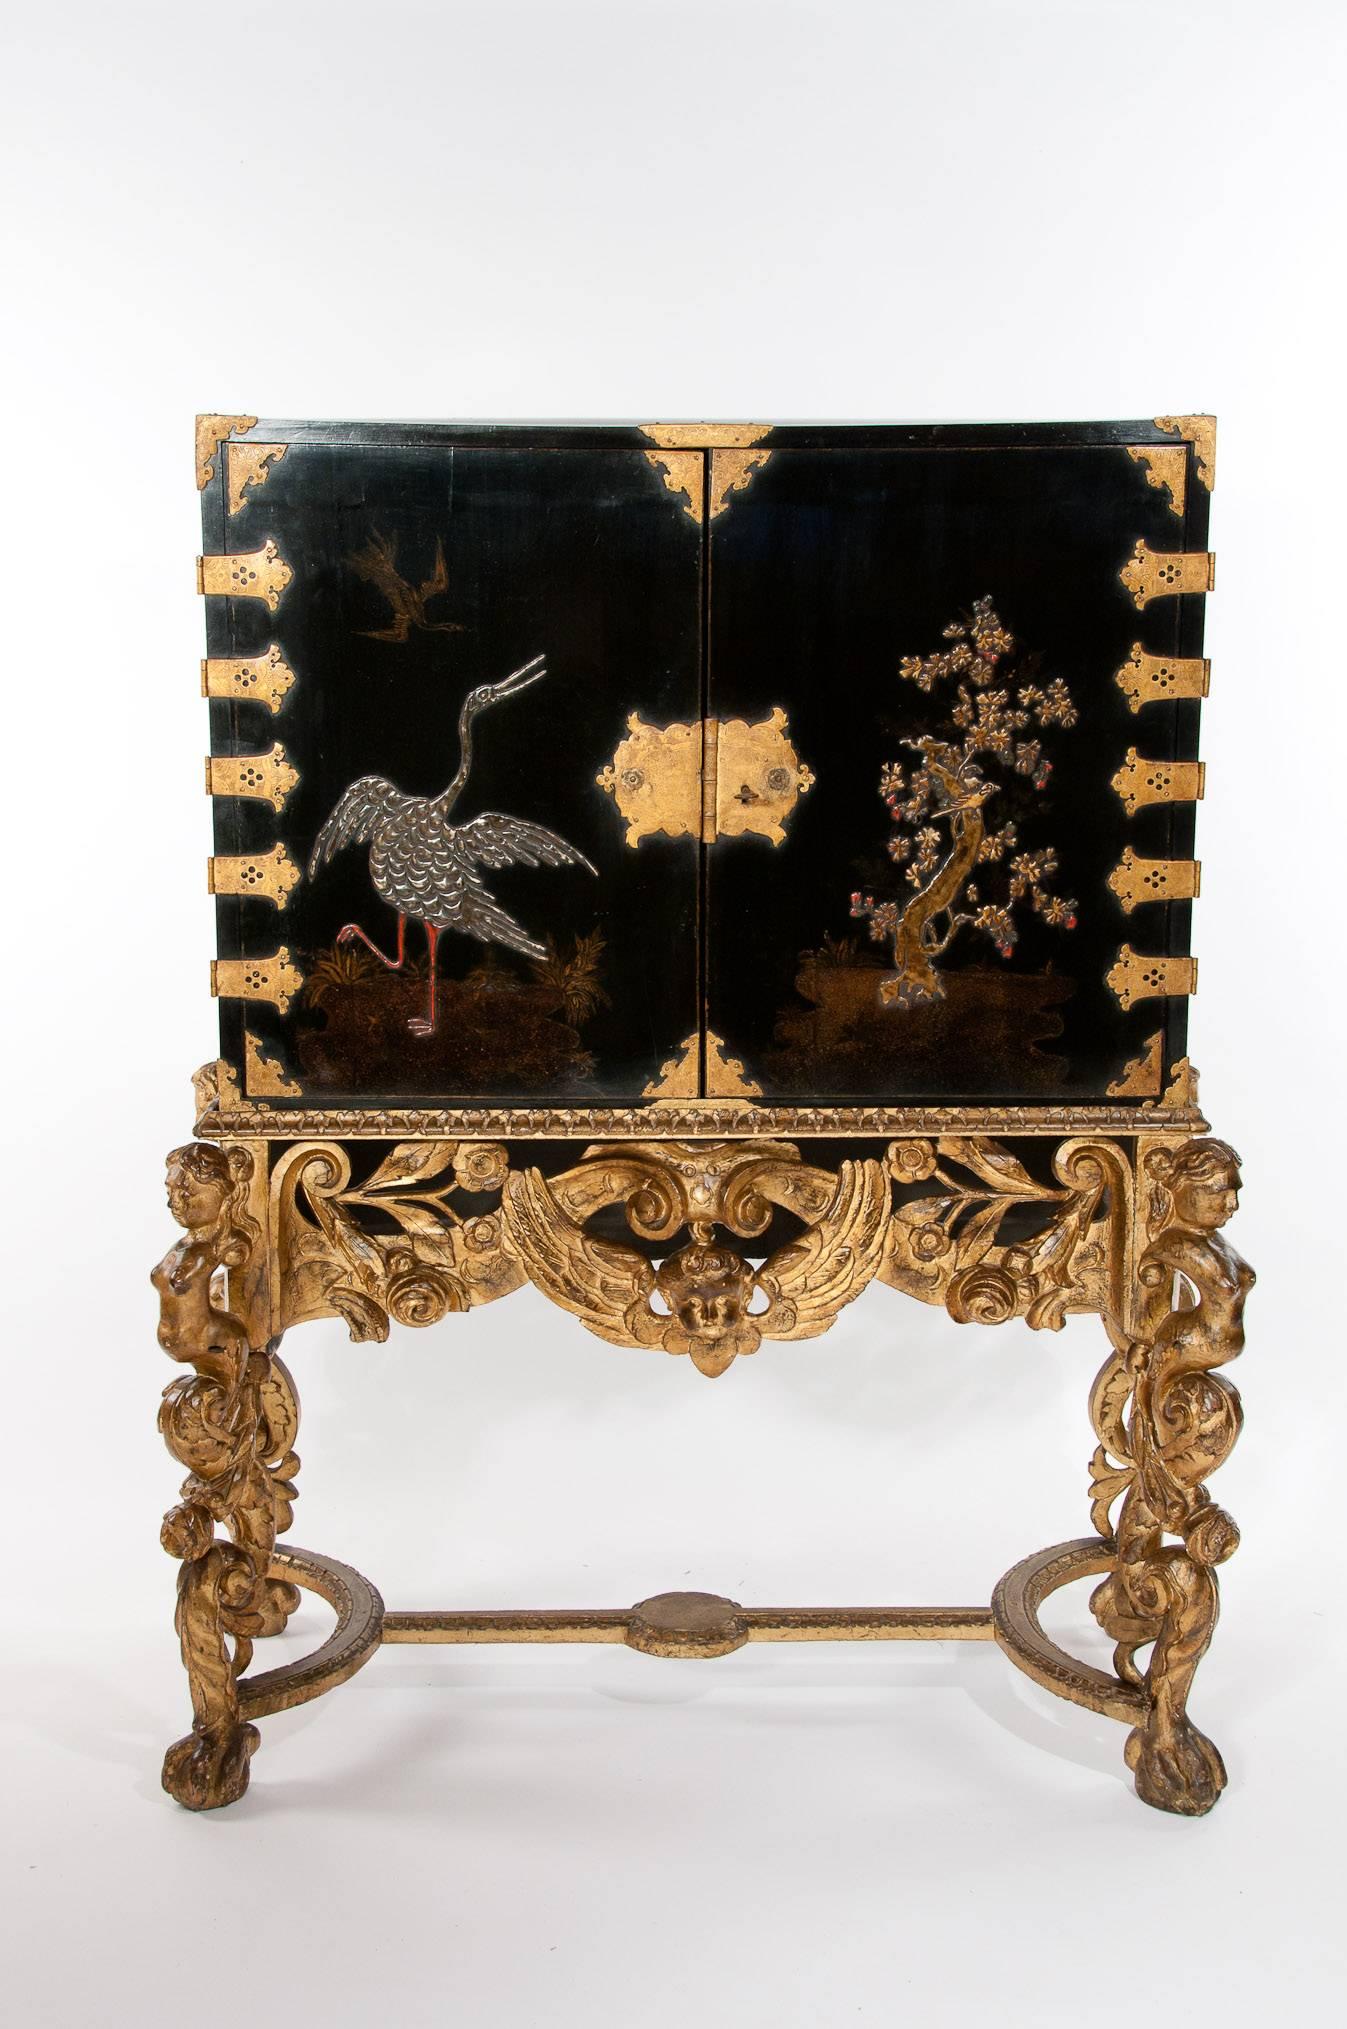 Giltwood Magnificent 17th Century Japanned Collectors Cabinet on Stand